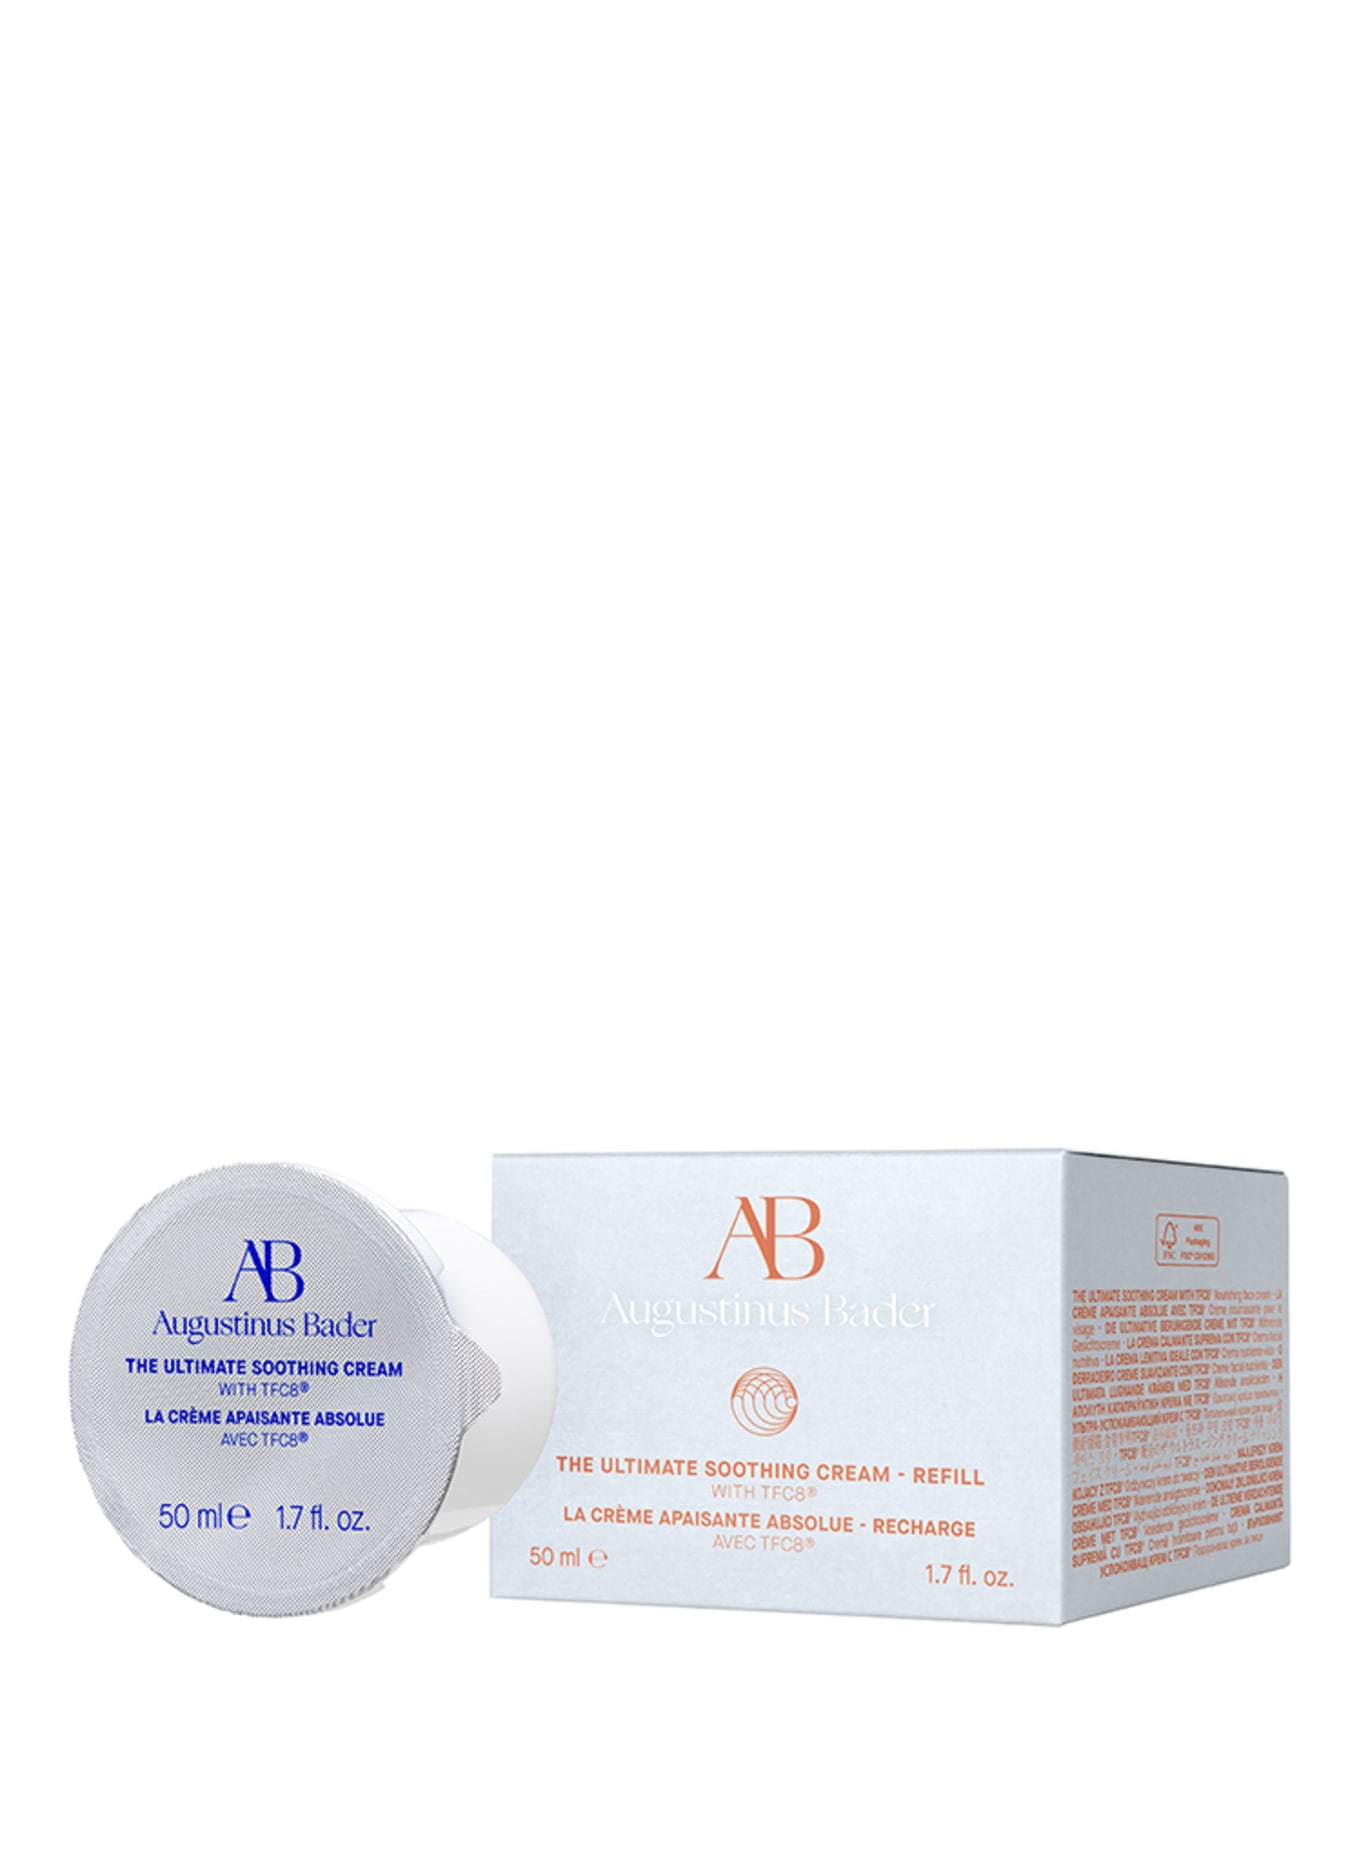 Augustinus Bader THE ULTIMATE SOOTHING CREAM REFILL (Bild 2)